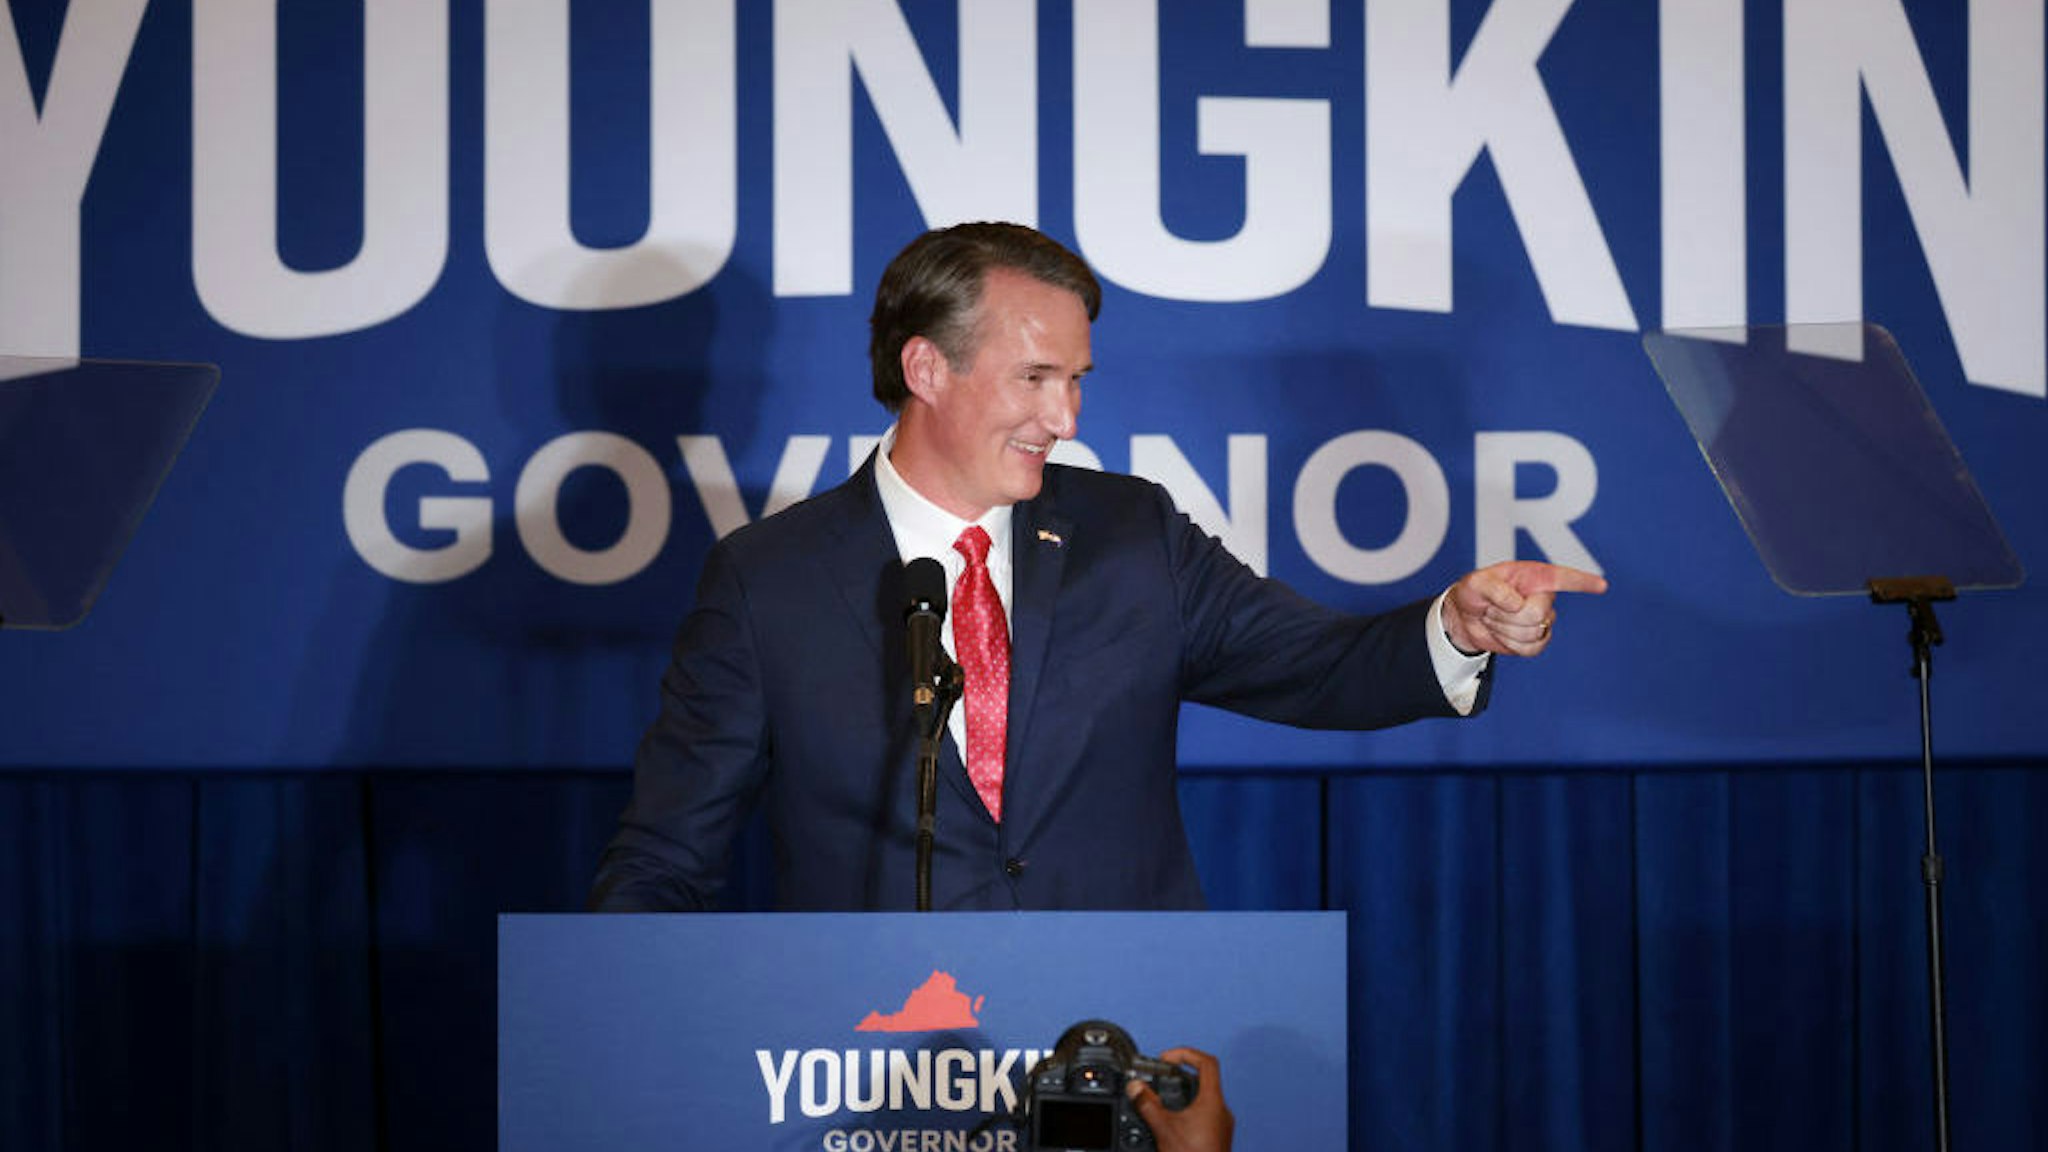 CHANTILLY, VIRGINIA - NOVEMBER 02: Virginia Republican gubernatorial candidate Glenn Youngkin takes the stage at an election-night rally at the Westfields Marriott Washington Dulles on November 02, 2021 in Chantilly, Virginia. Virginians went to the polls Tuesday to vote in the gubernatorial race that pitted Youngkin against Democratic gubernatorial candidate, former Virginia Gov. Terry McAuliffe. (Photo by Chip Somodevilla/Getty Images)